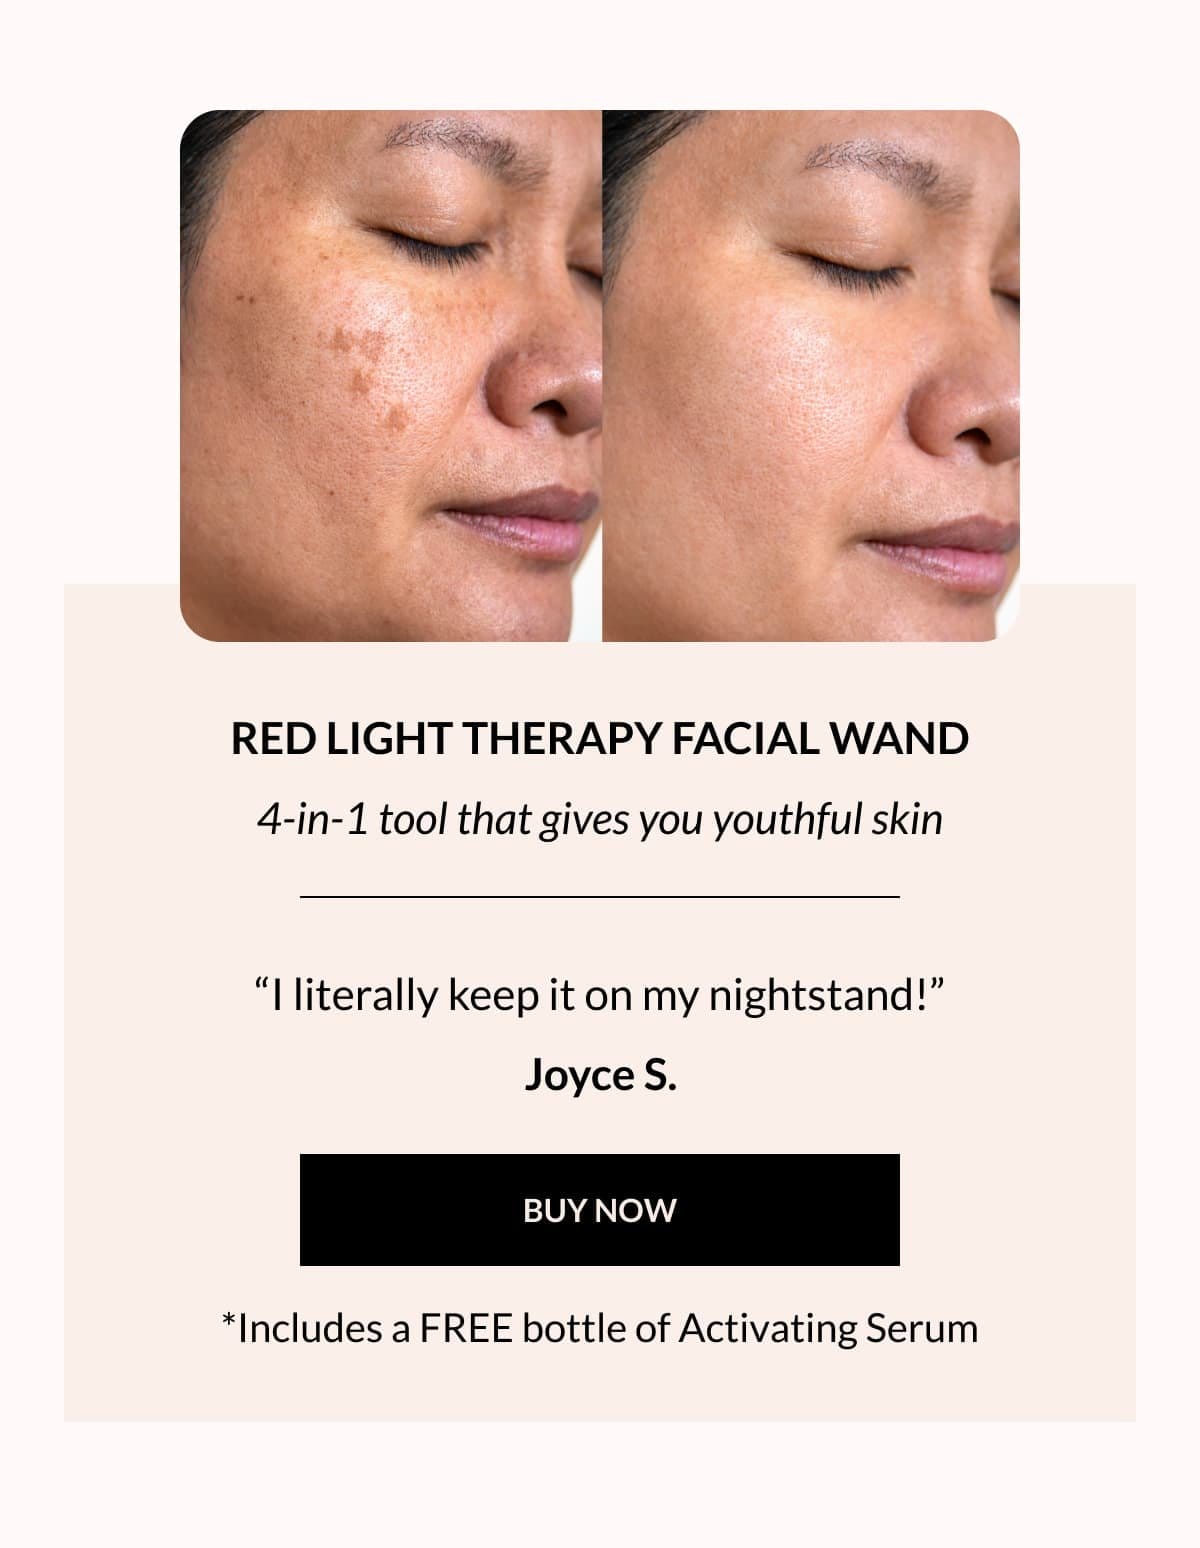 Red Light Therapy Facial Wand